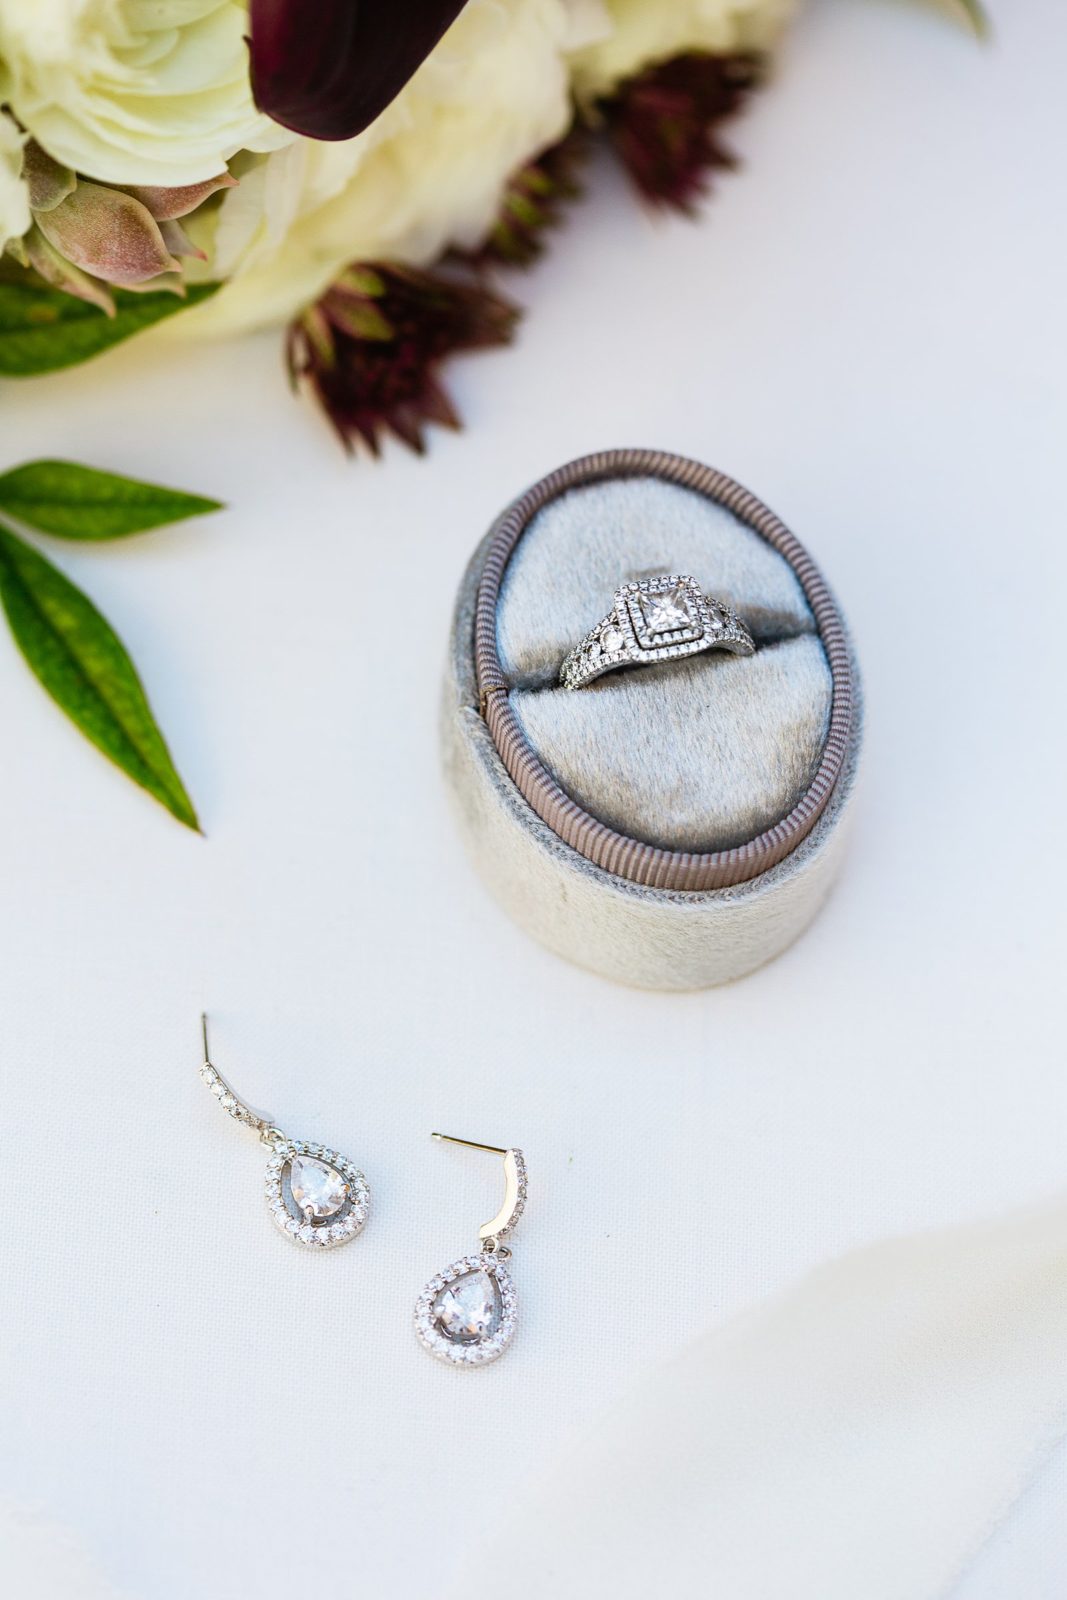 Brides white gold square wedding ring and drop earrings by PMA Photography.